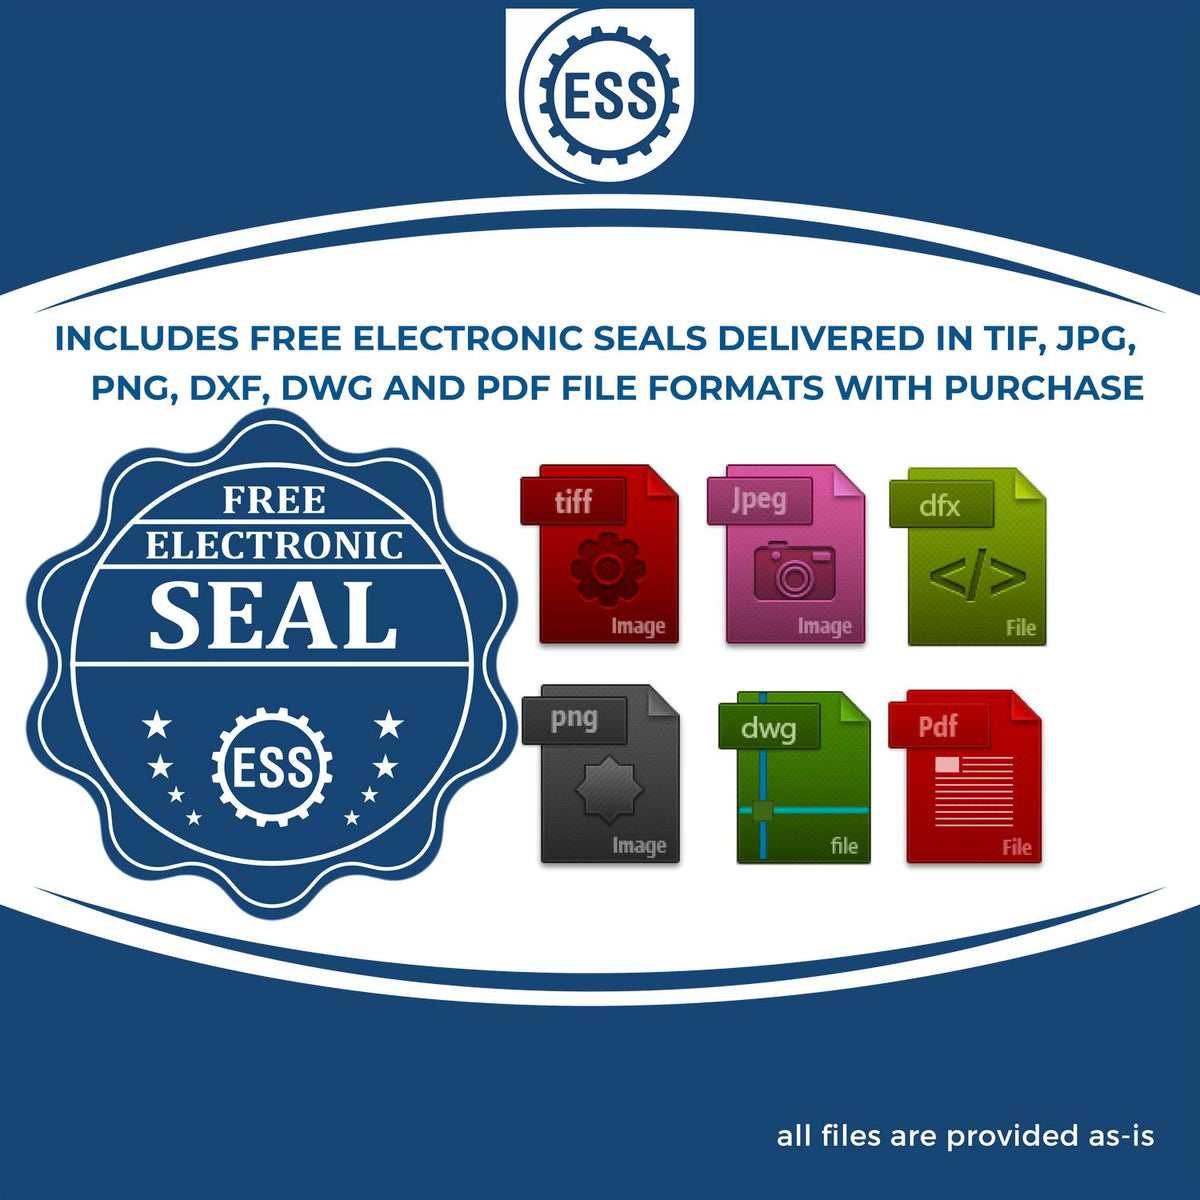 An infographic for the free electronic seal for the Soft Washington Professional Engineer Seal illustrating the different file type icons such as DXF, DWG, TIF, JPG and PNG.